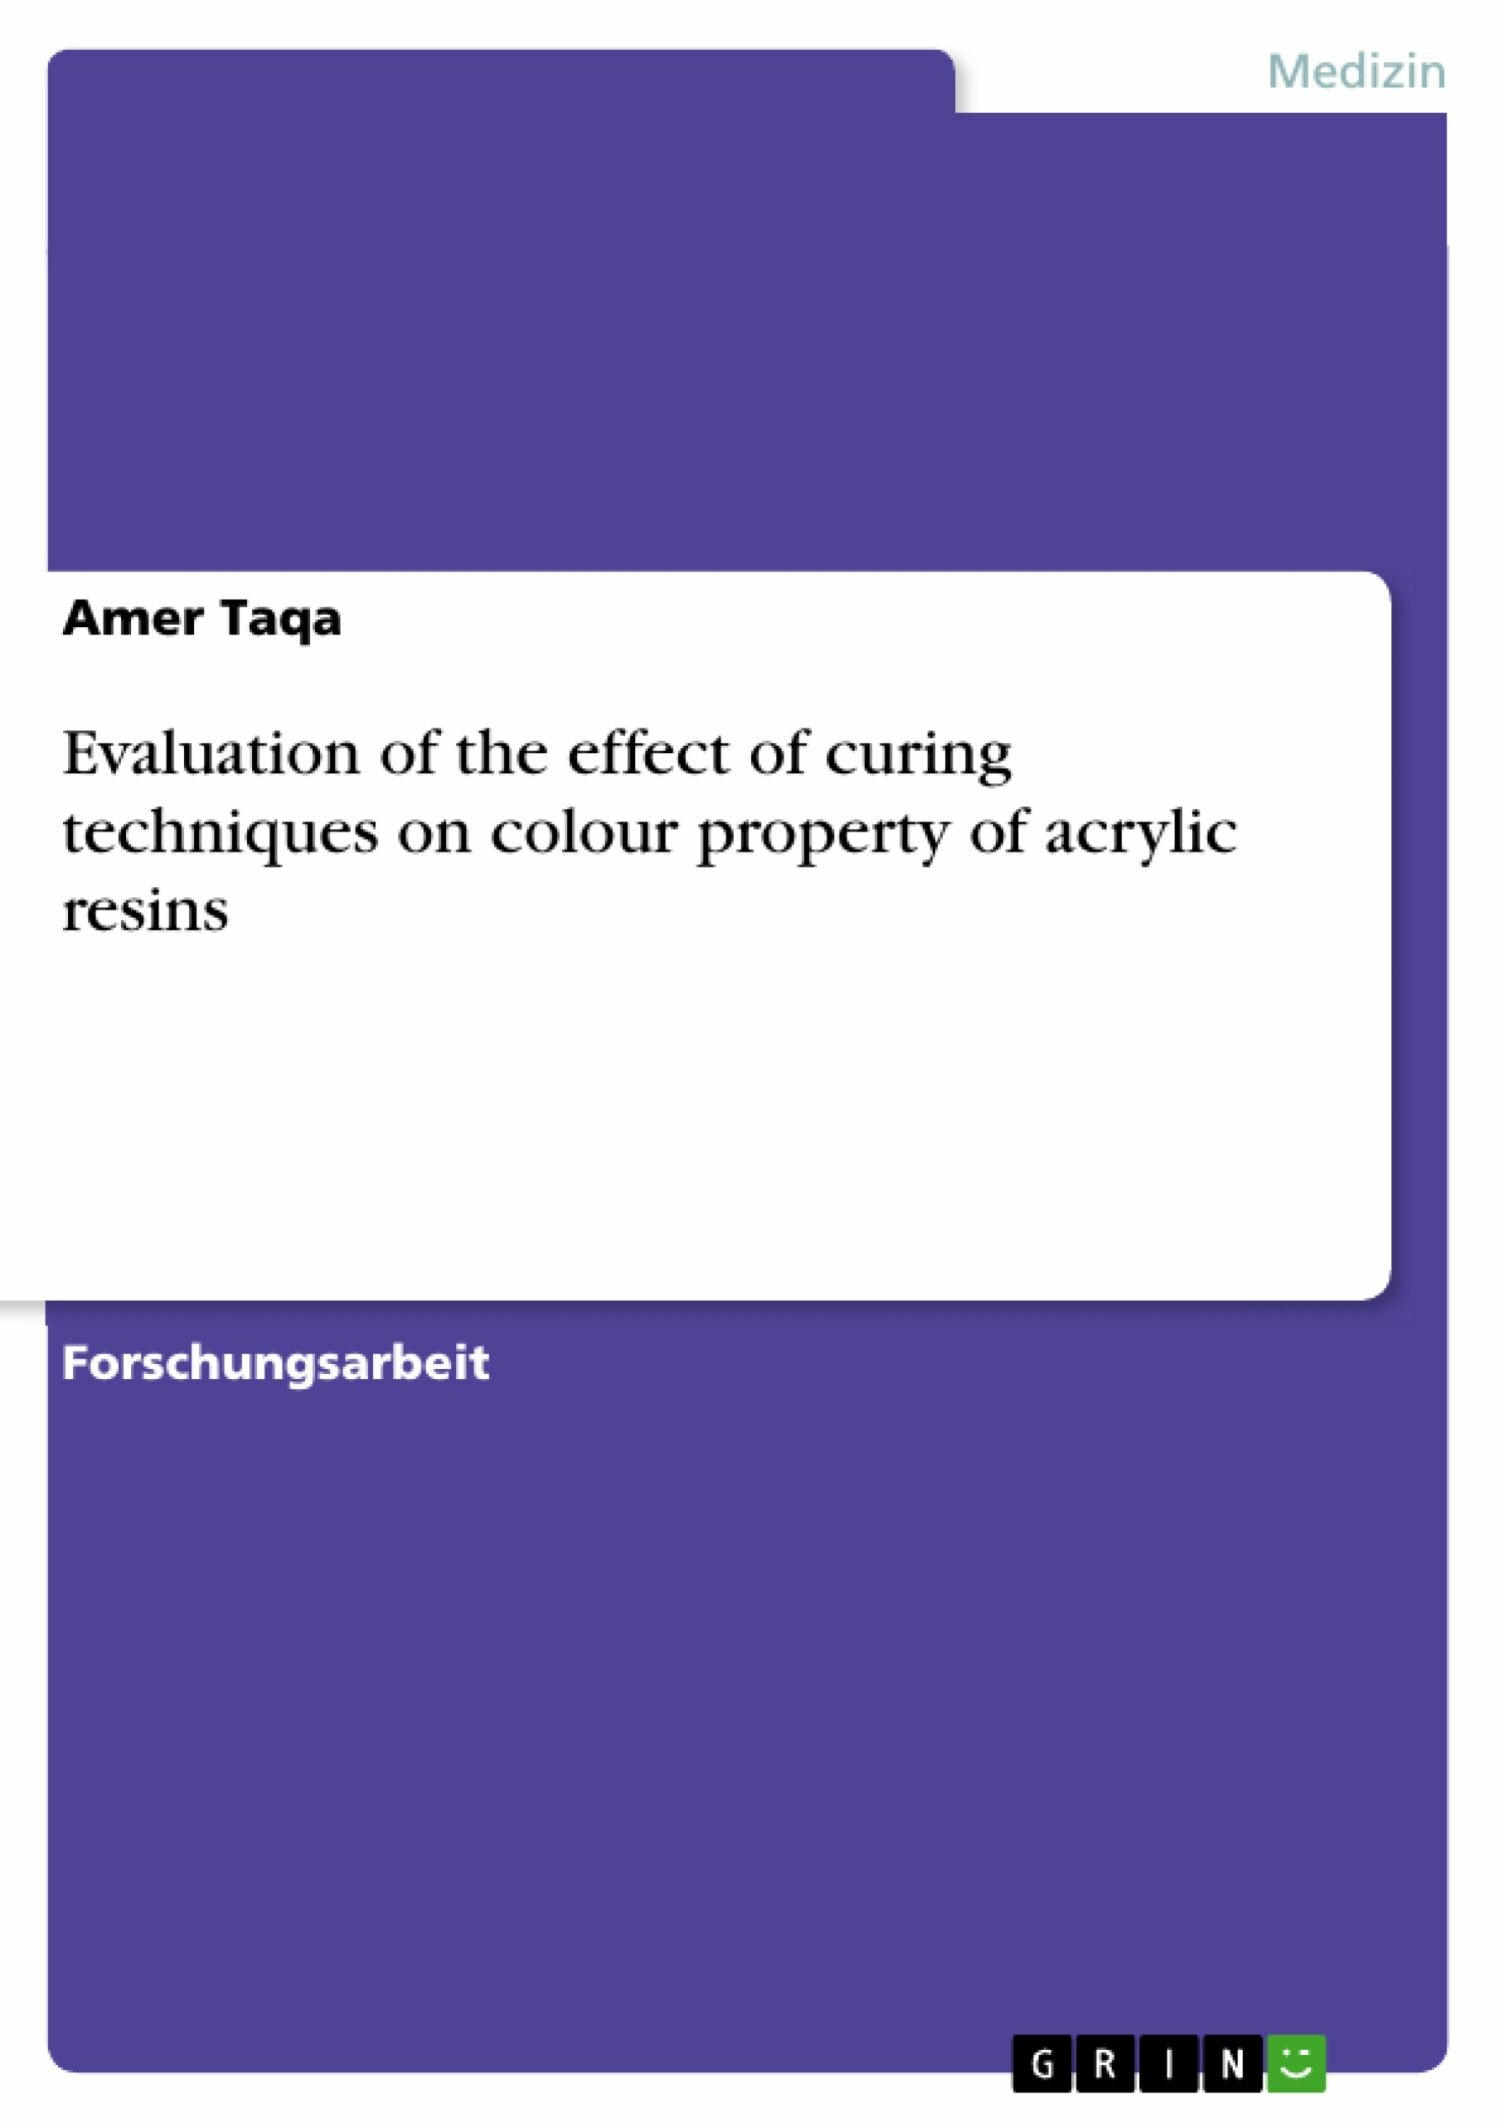 Evaluation of the effect of curing techniques on colour property of acrylic resins